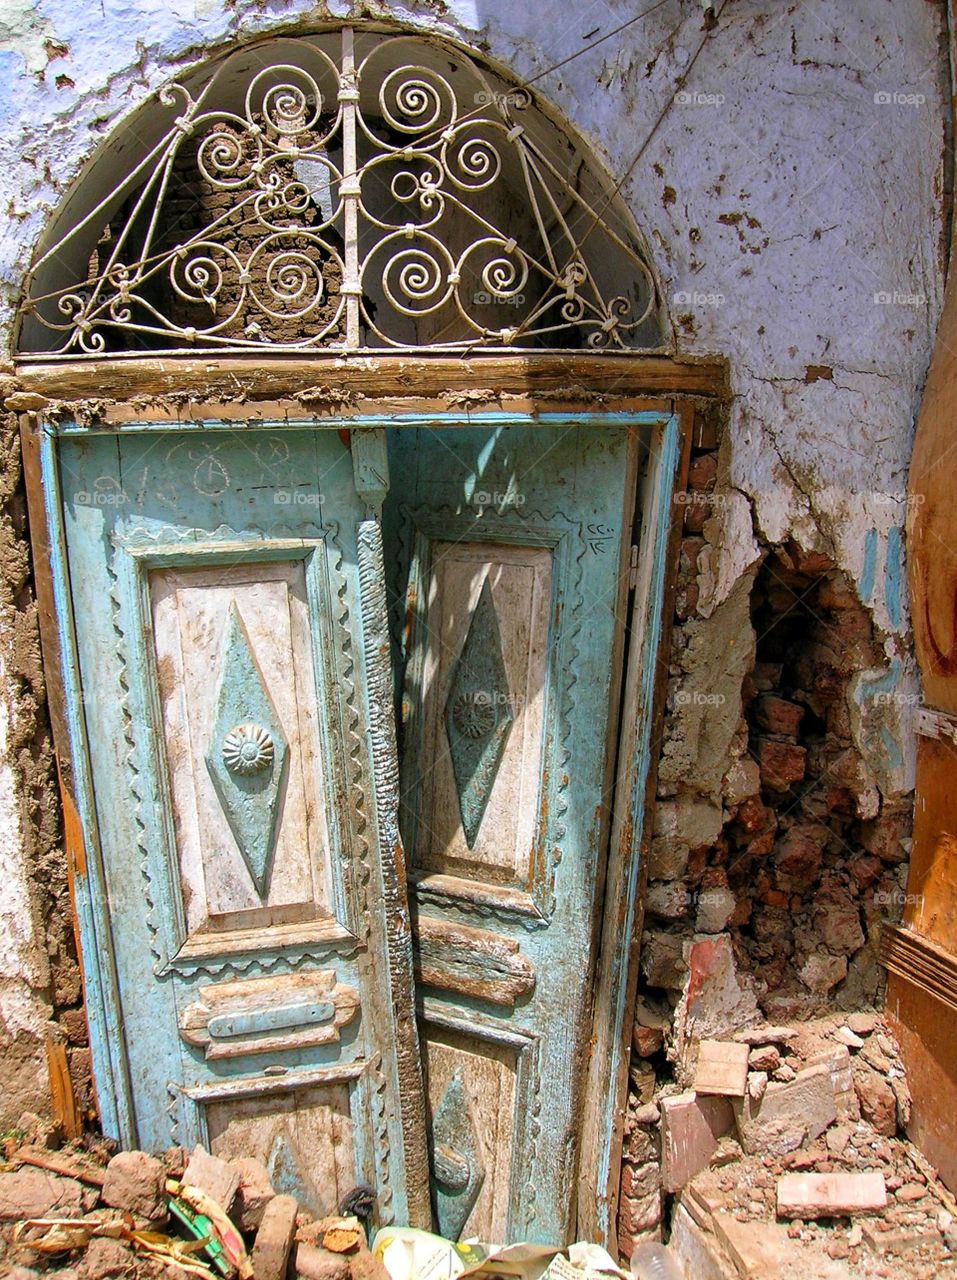 Picturesque doors of a once beautiful building in rural Egypt.